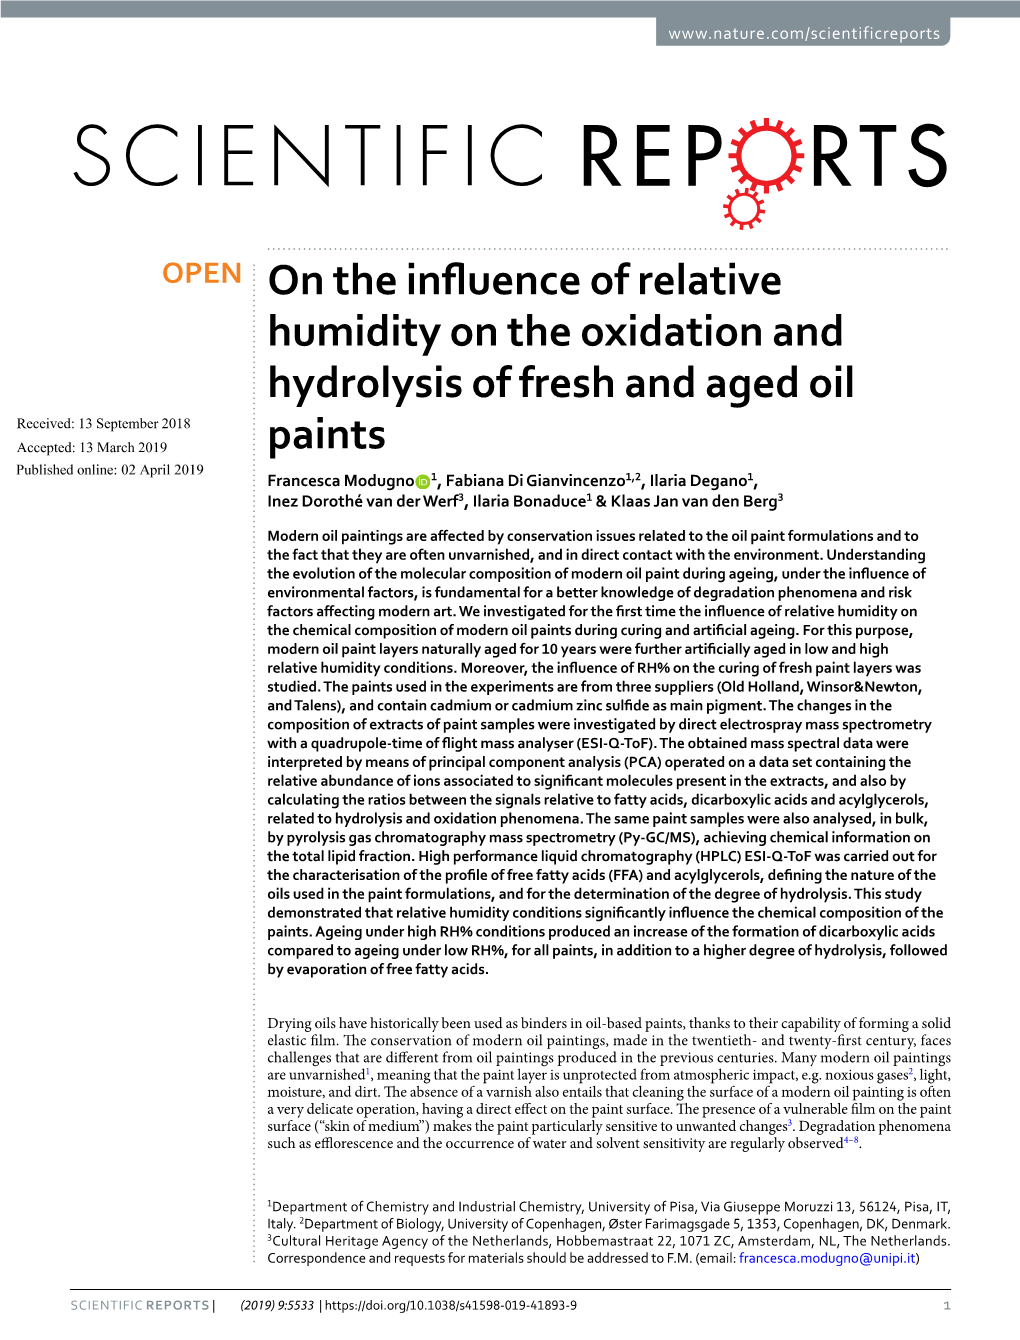 On the Influence of Relative Humidity on the Oxidation and Hydrolysis Of